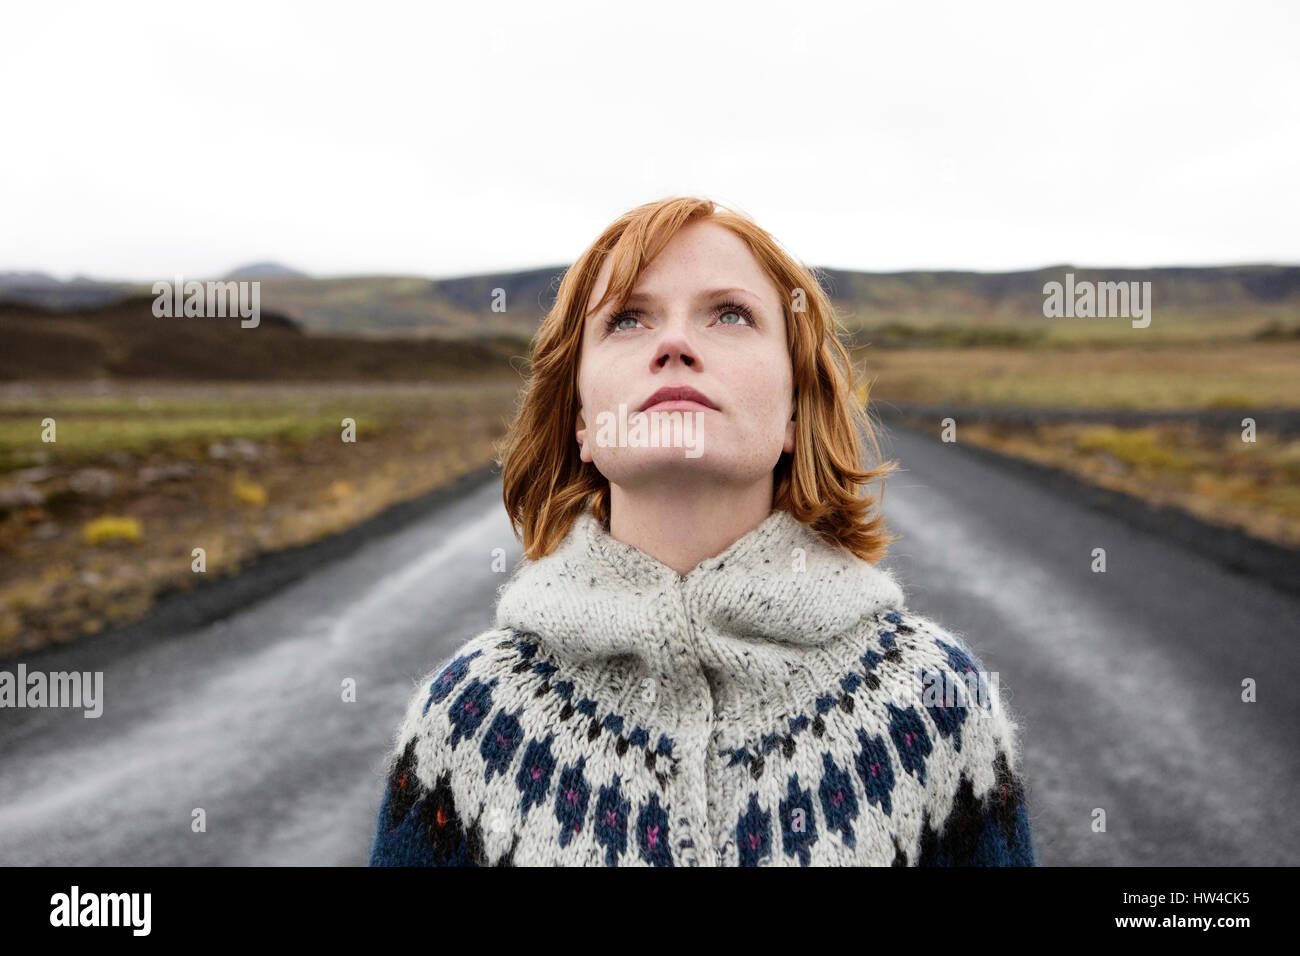 Caucasian woman wearing sweater in road looking up Stock Photo